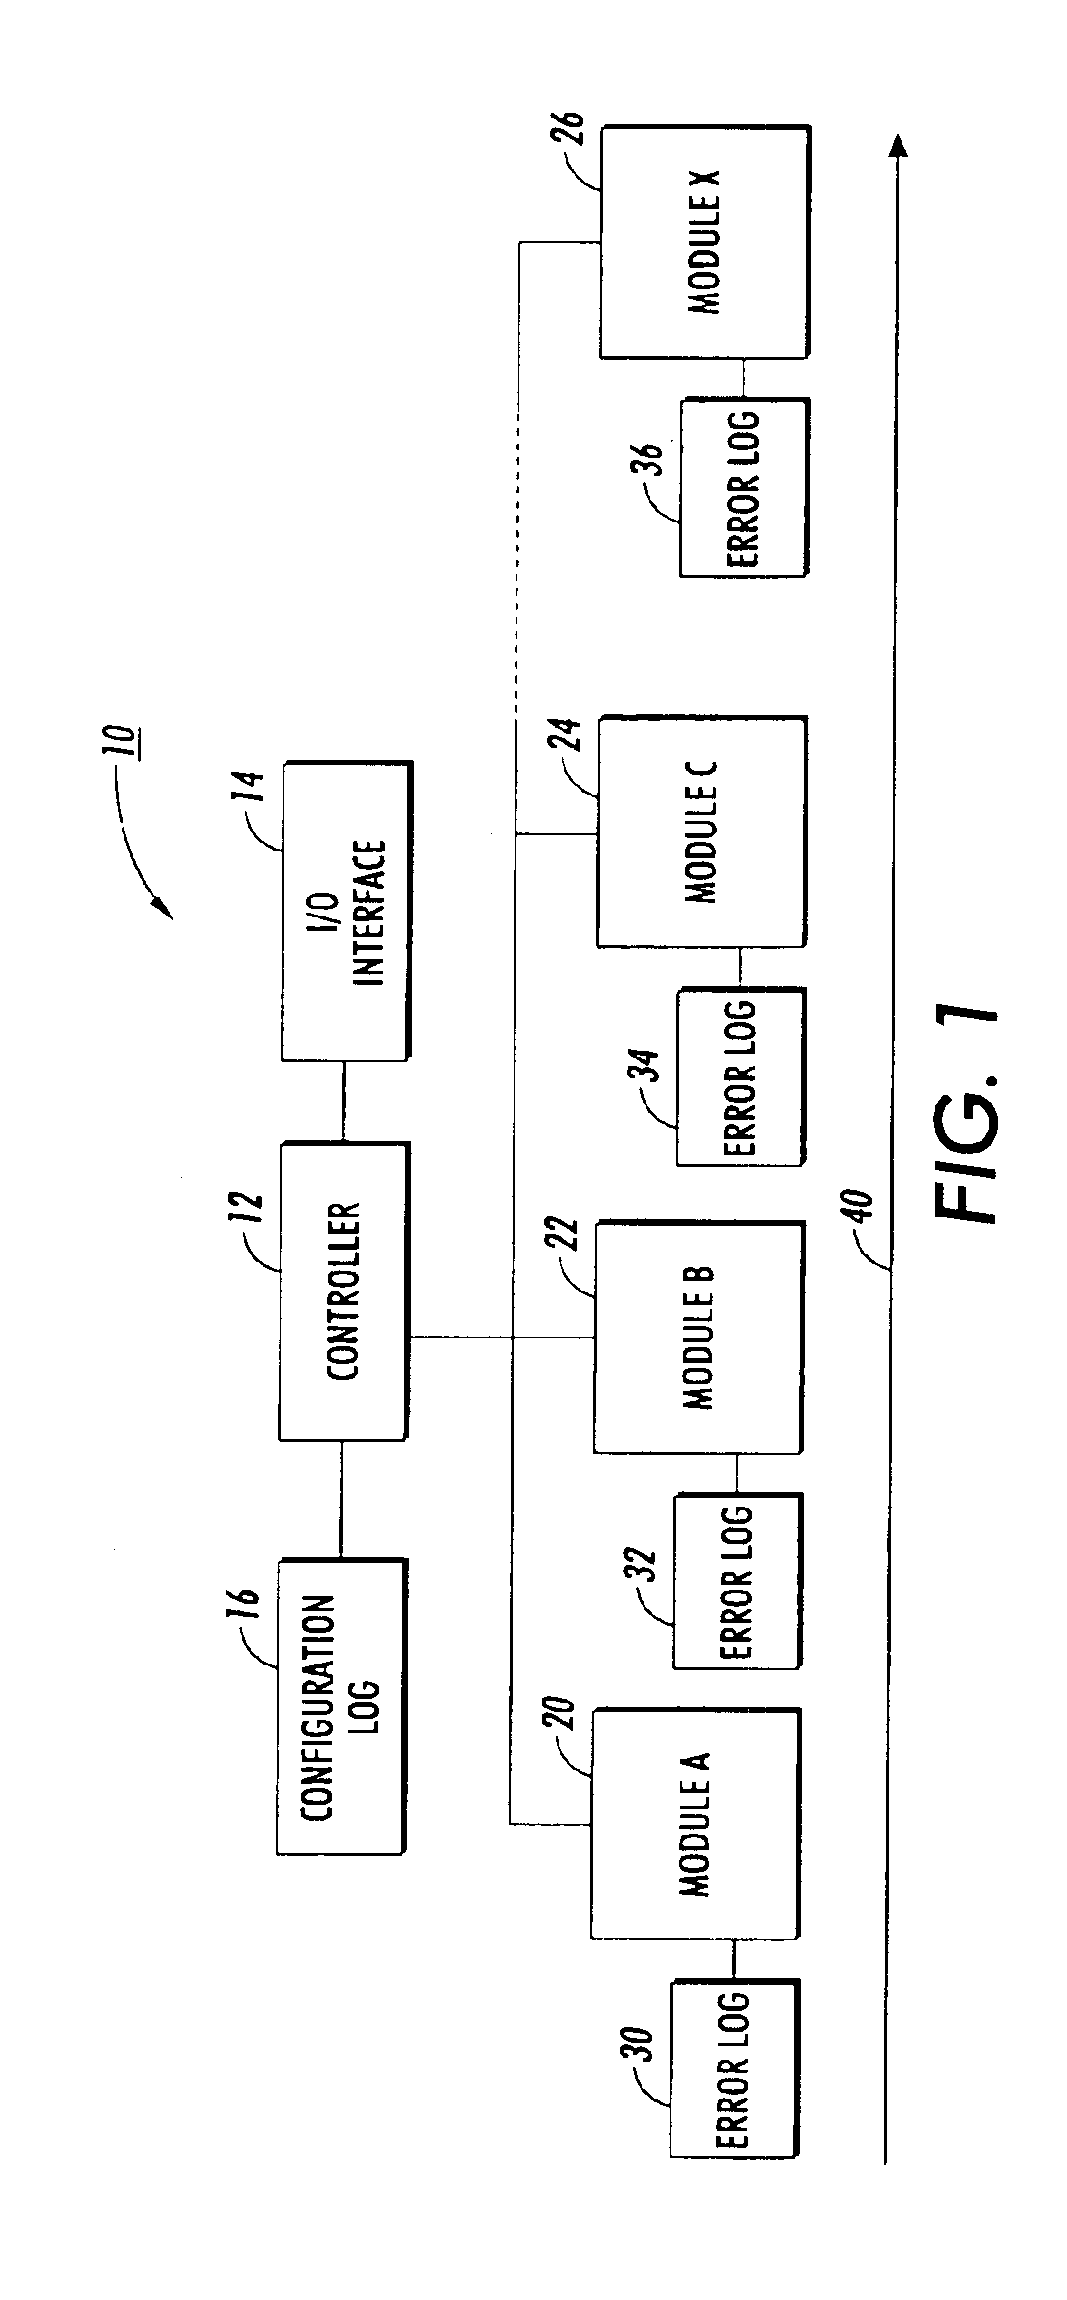 Method and apparatus for providing data logging in a modular device